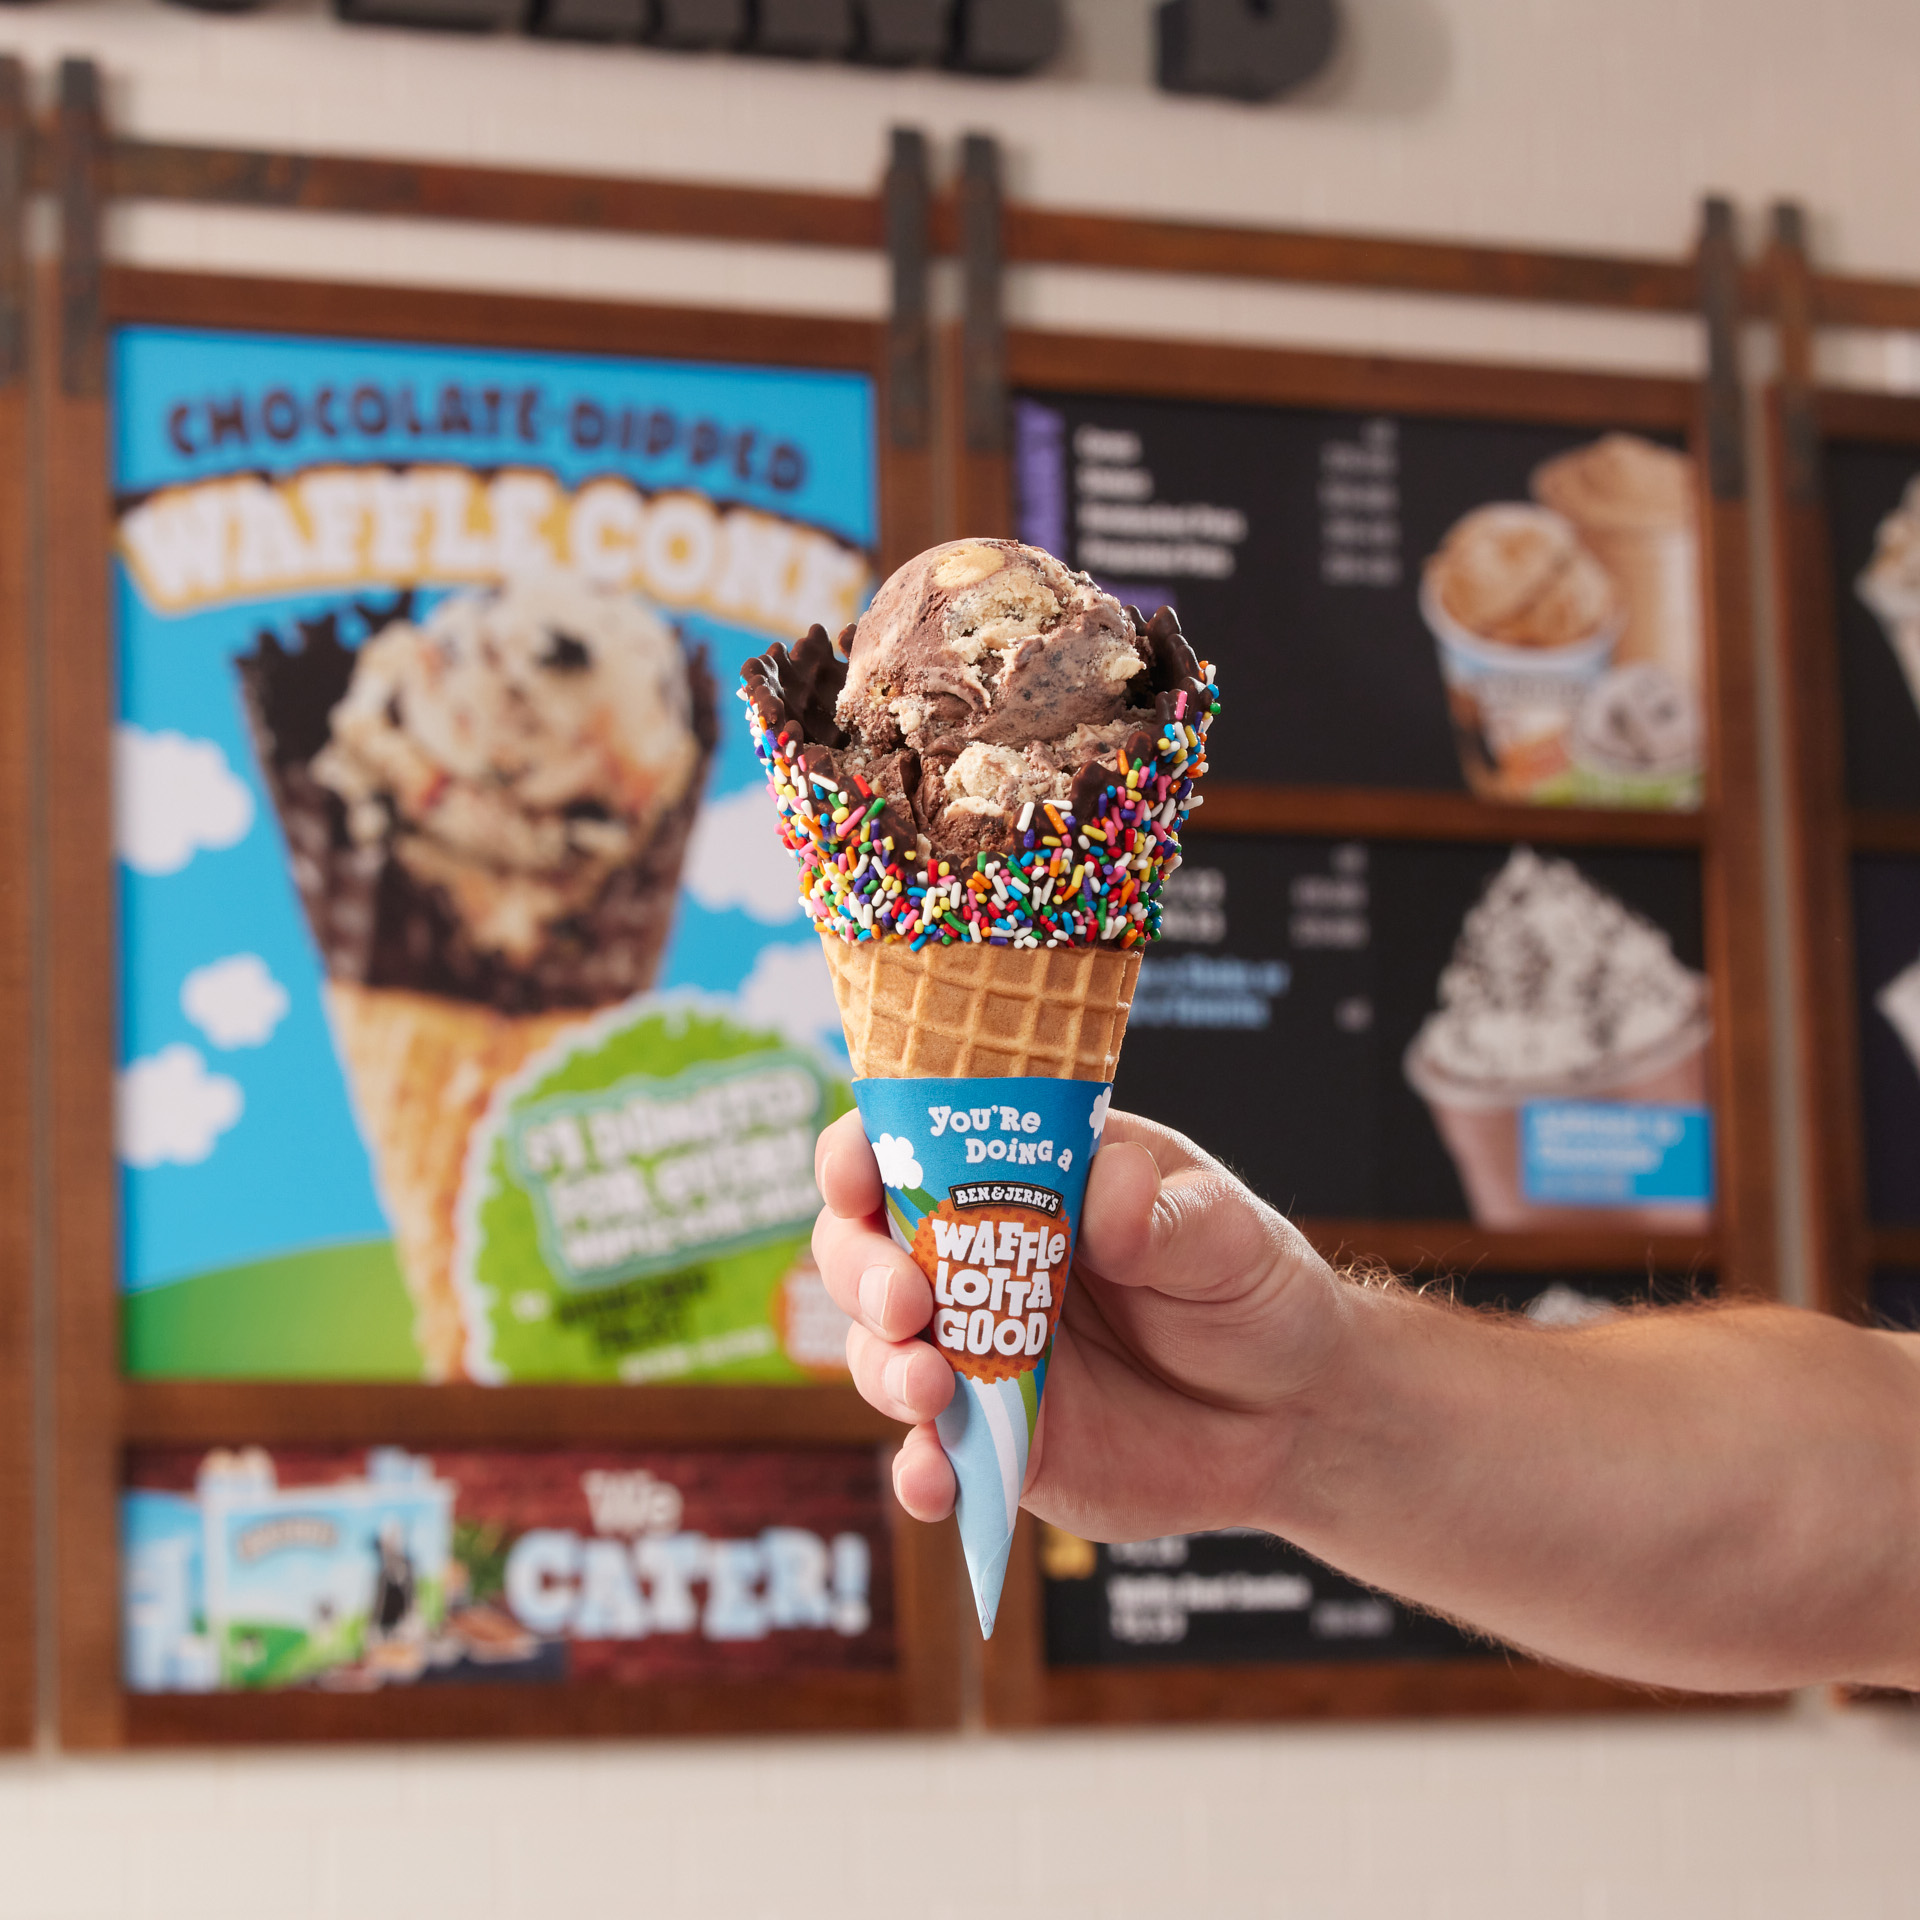 Helping the Advancement Project is "waffle" easy to do, with the in-store purchase of a waffle cone like this one at a Ben & Jerry's Scoop Shop.